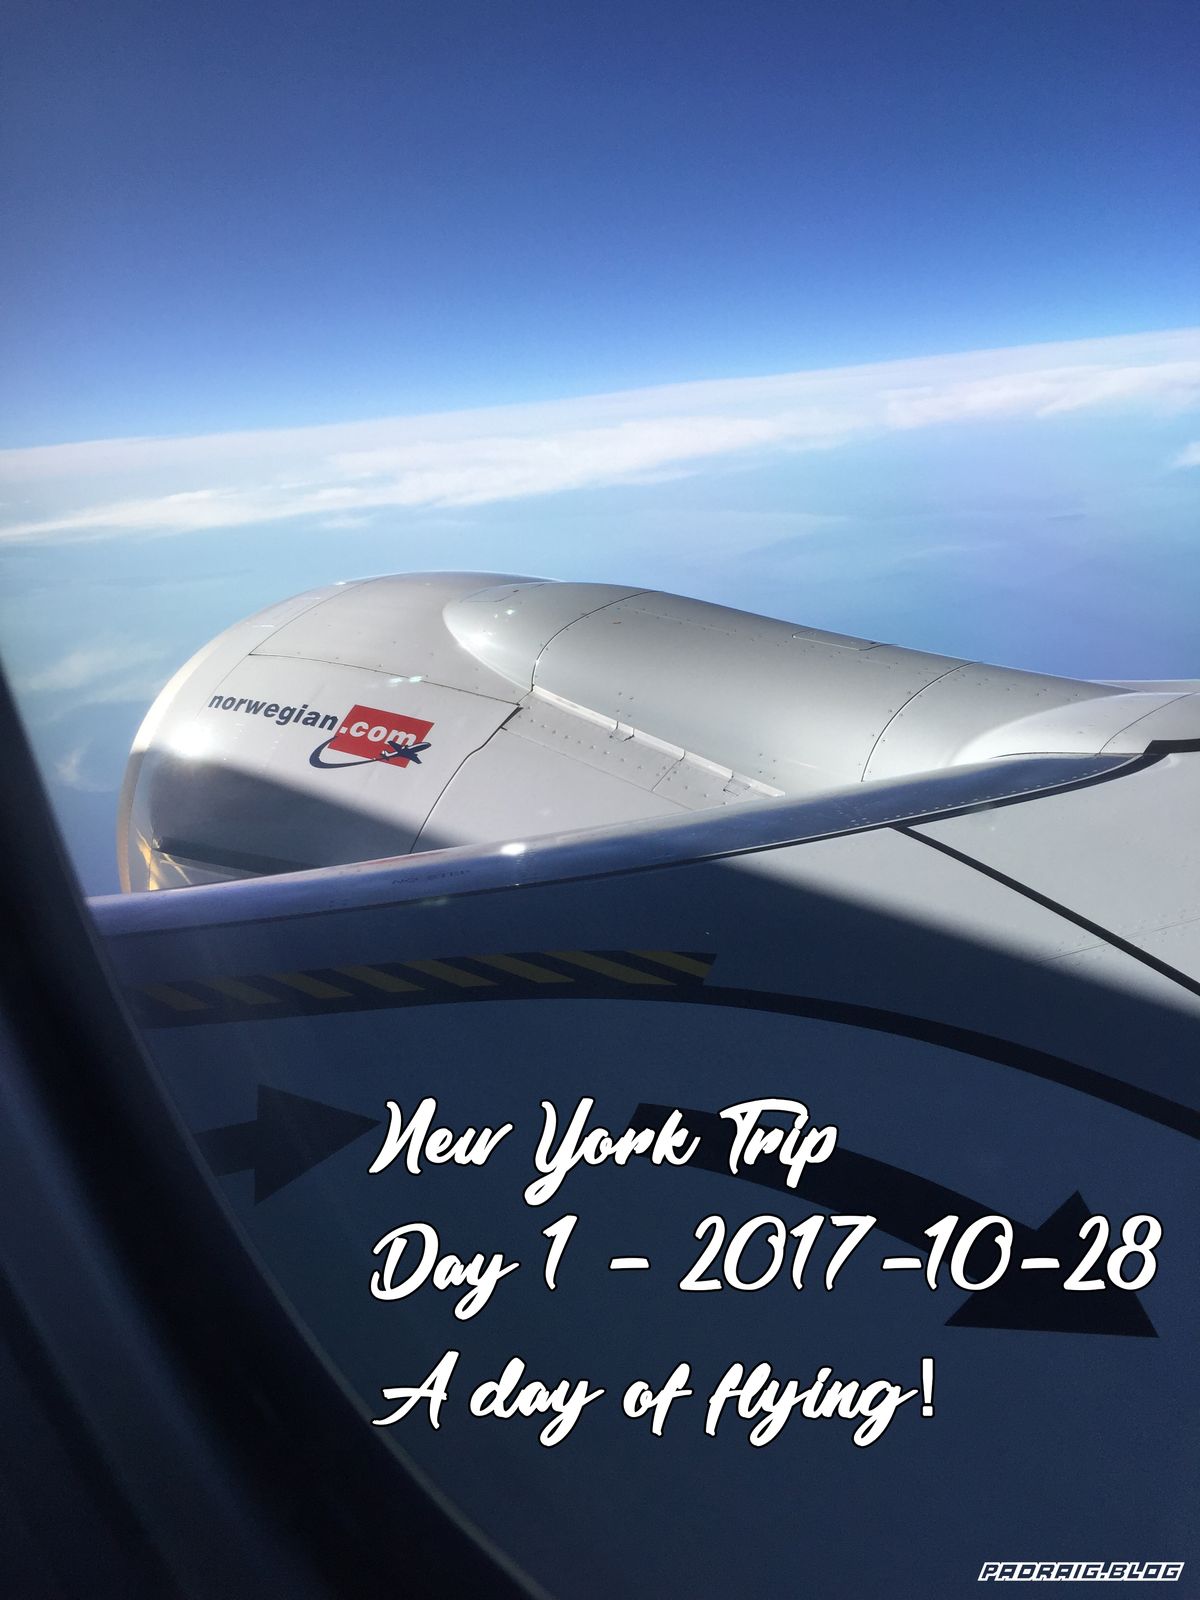 New York City - Day 1 - "A Day of Flying"